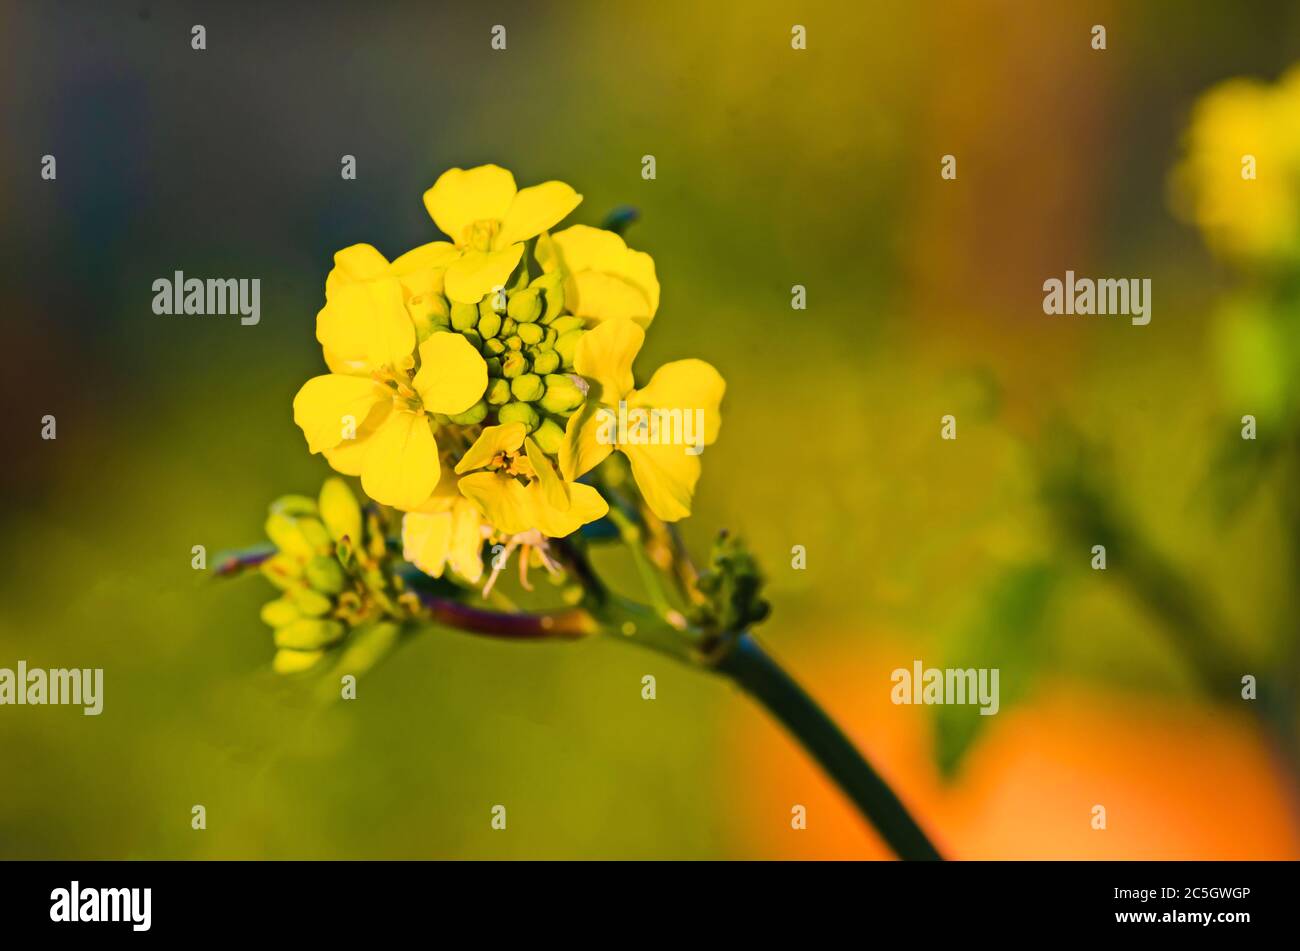 Rapeseed flower and seeds used to produce Canola Oil. Stock Photo